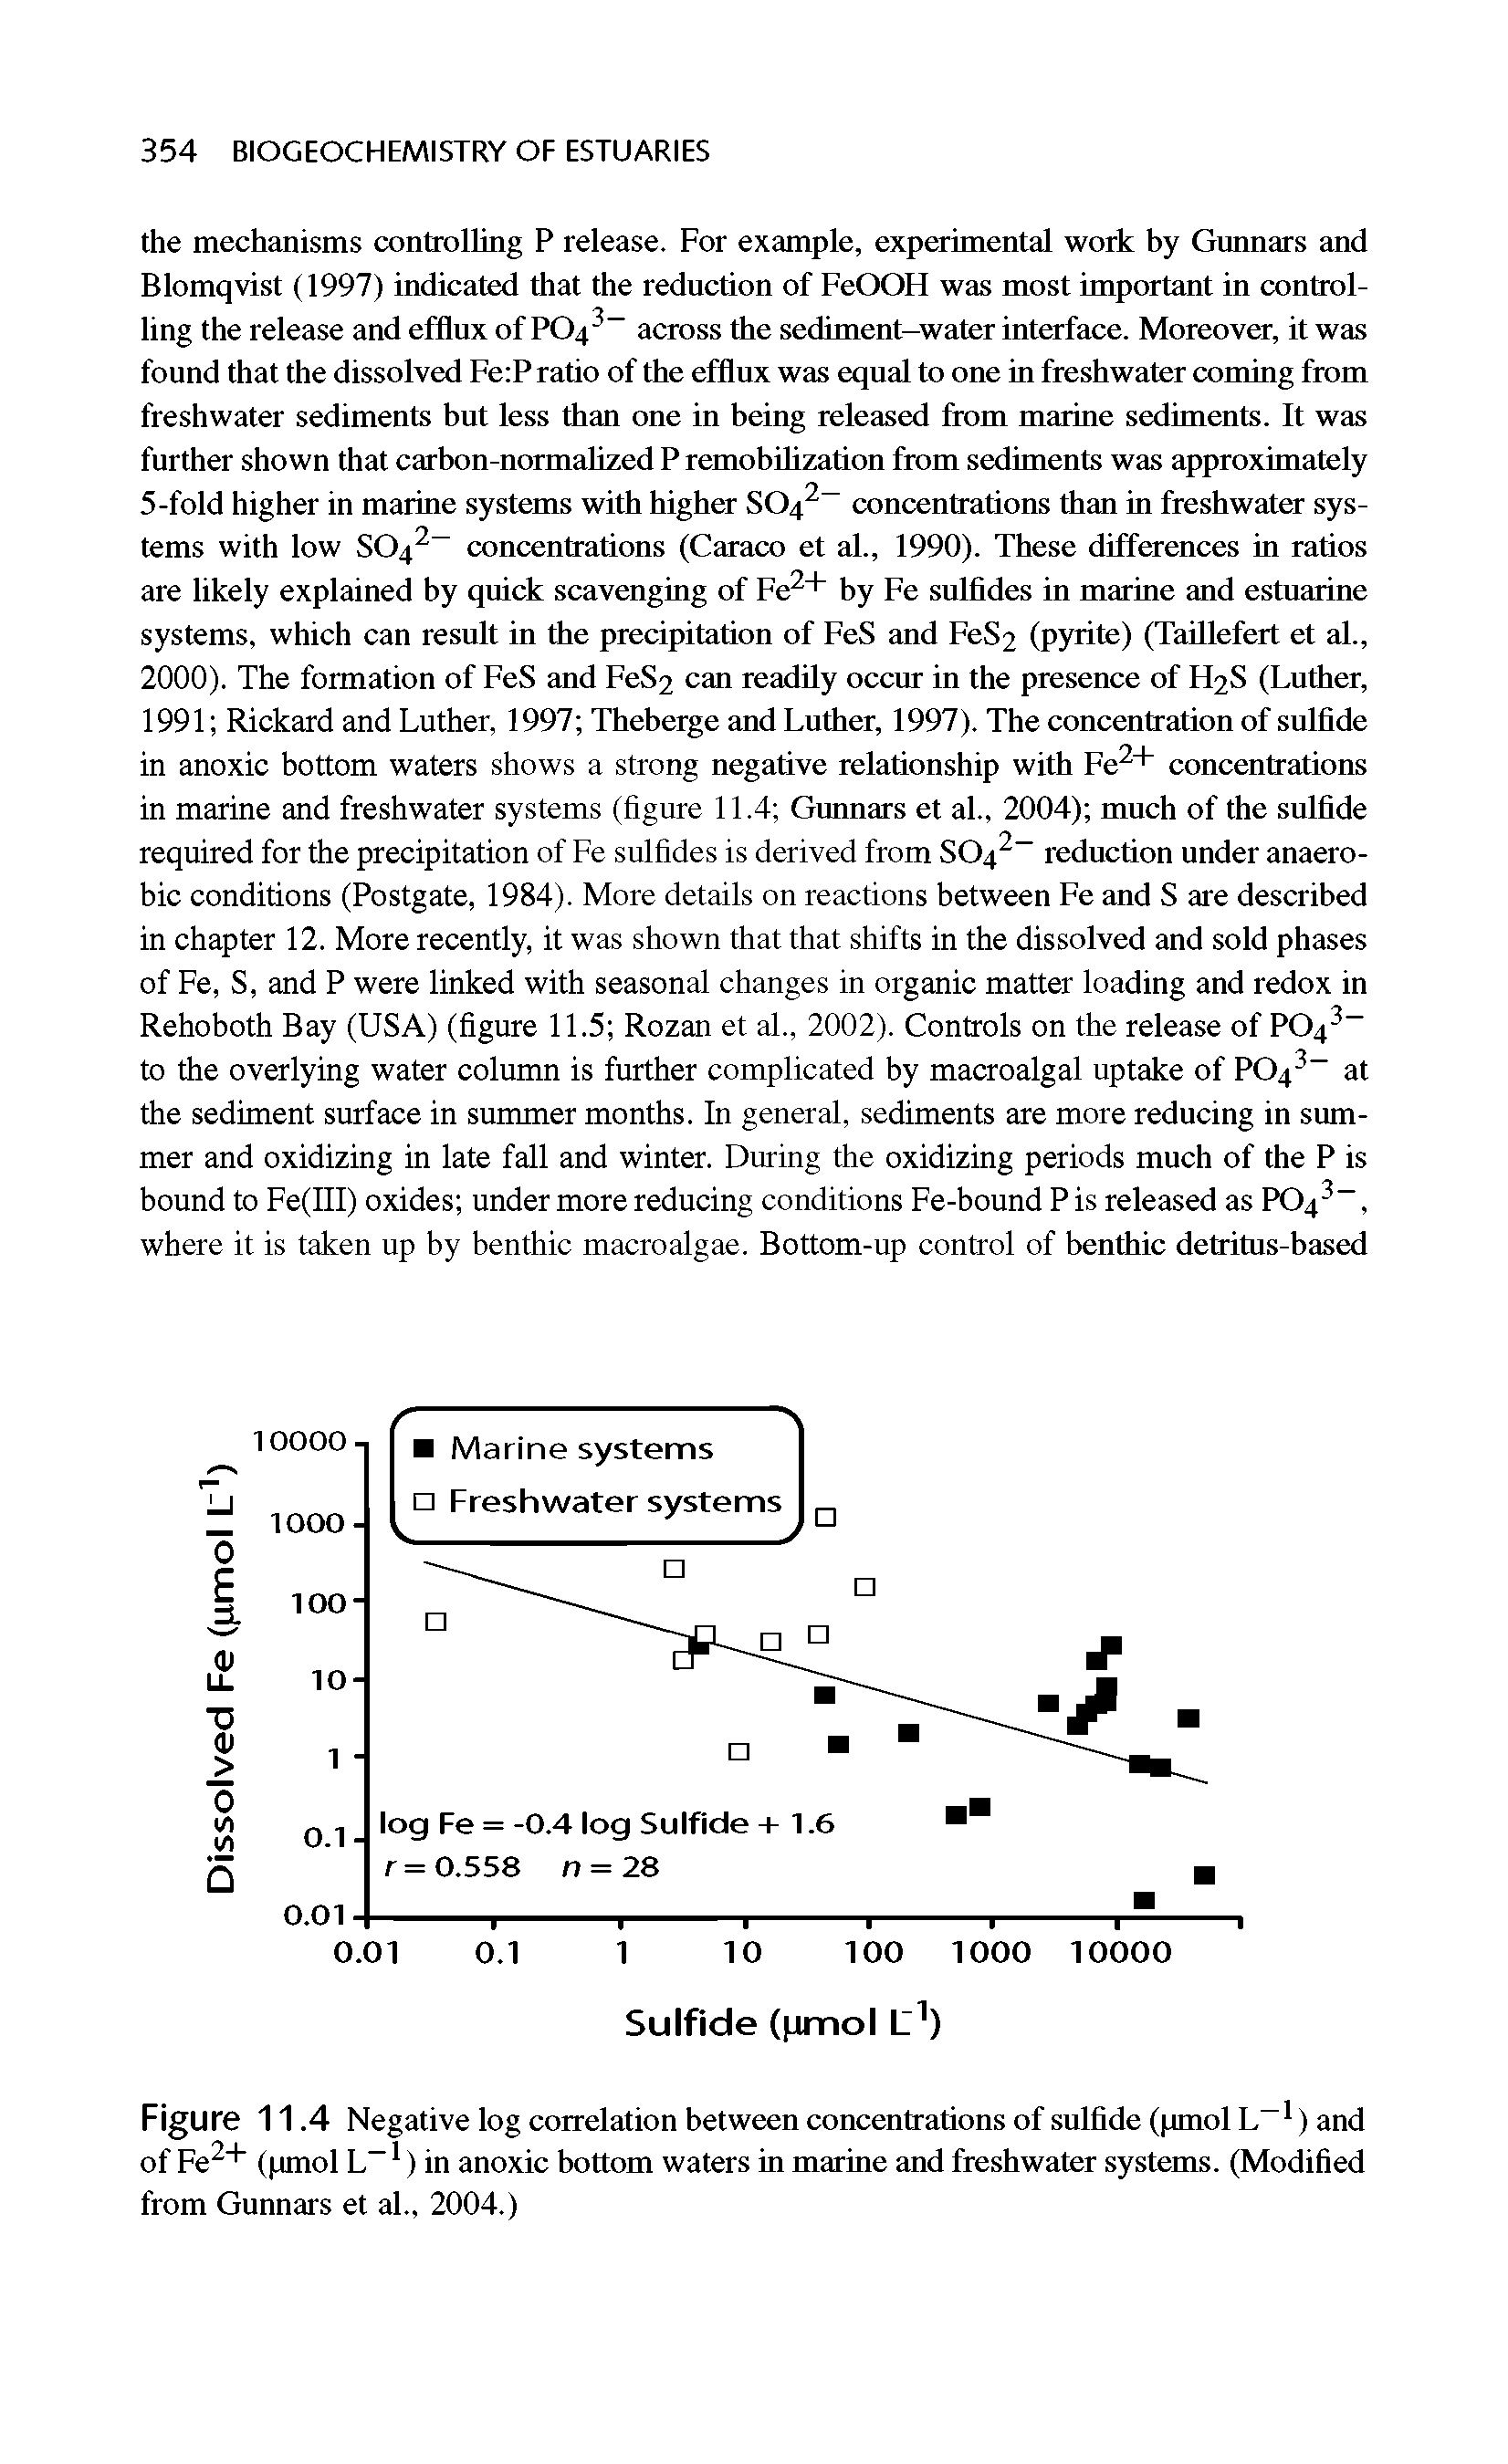 Figure 11.4 Negative log correlation between concentrations of sulfide (pmol L 1) and of Fe2+ (pmol L 1) in anoxic bottom waters in marine and freshwater systems. (Modified from Gunnars et al., 2004.)...